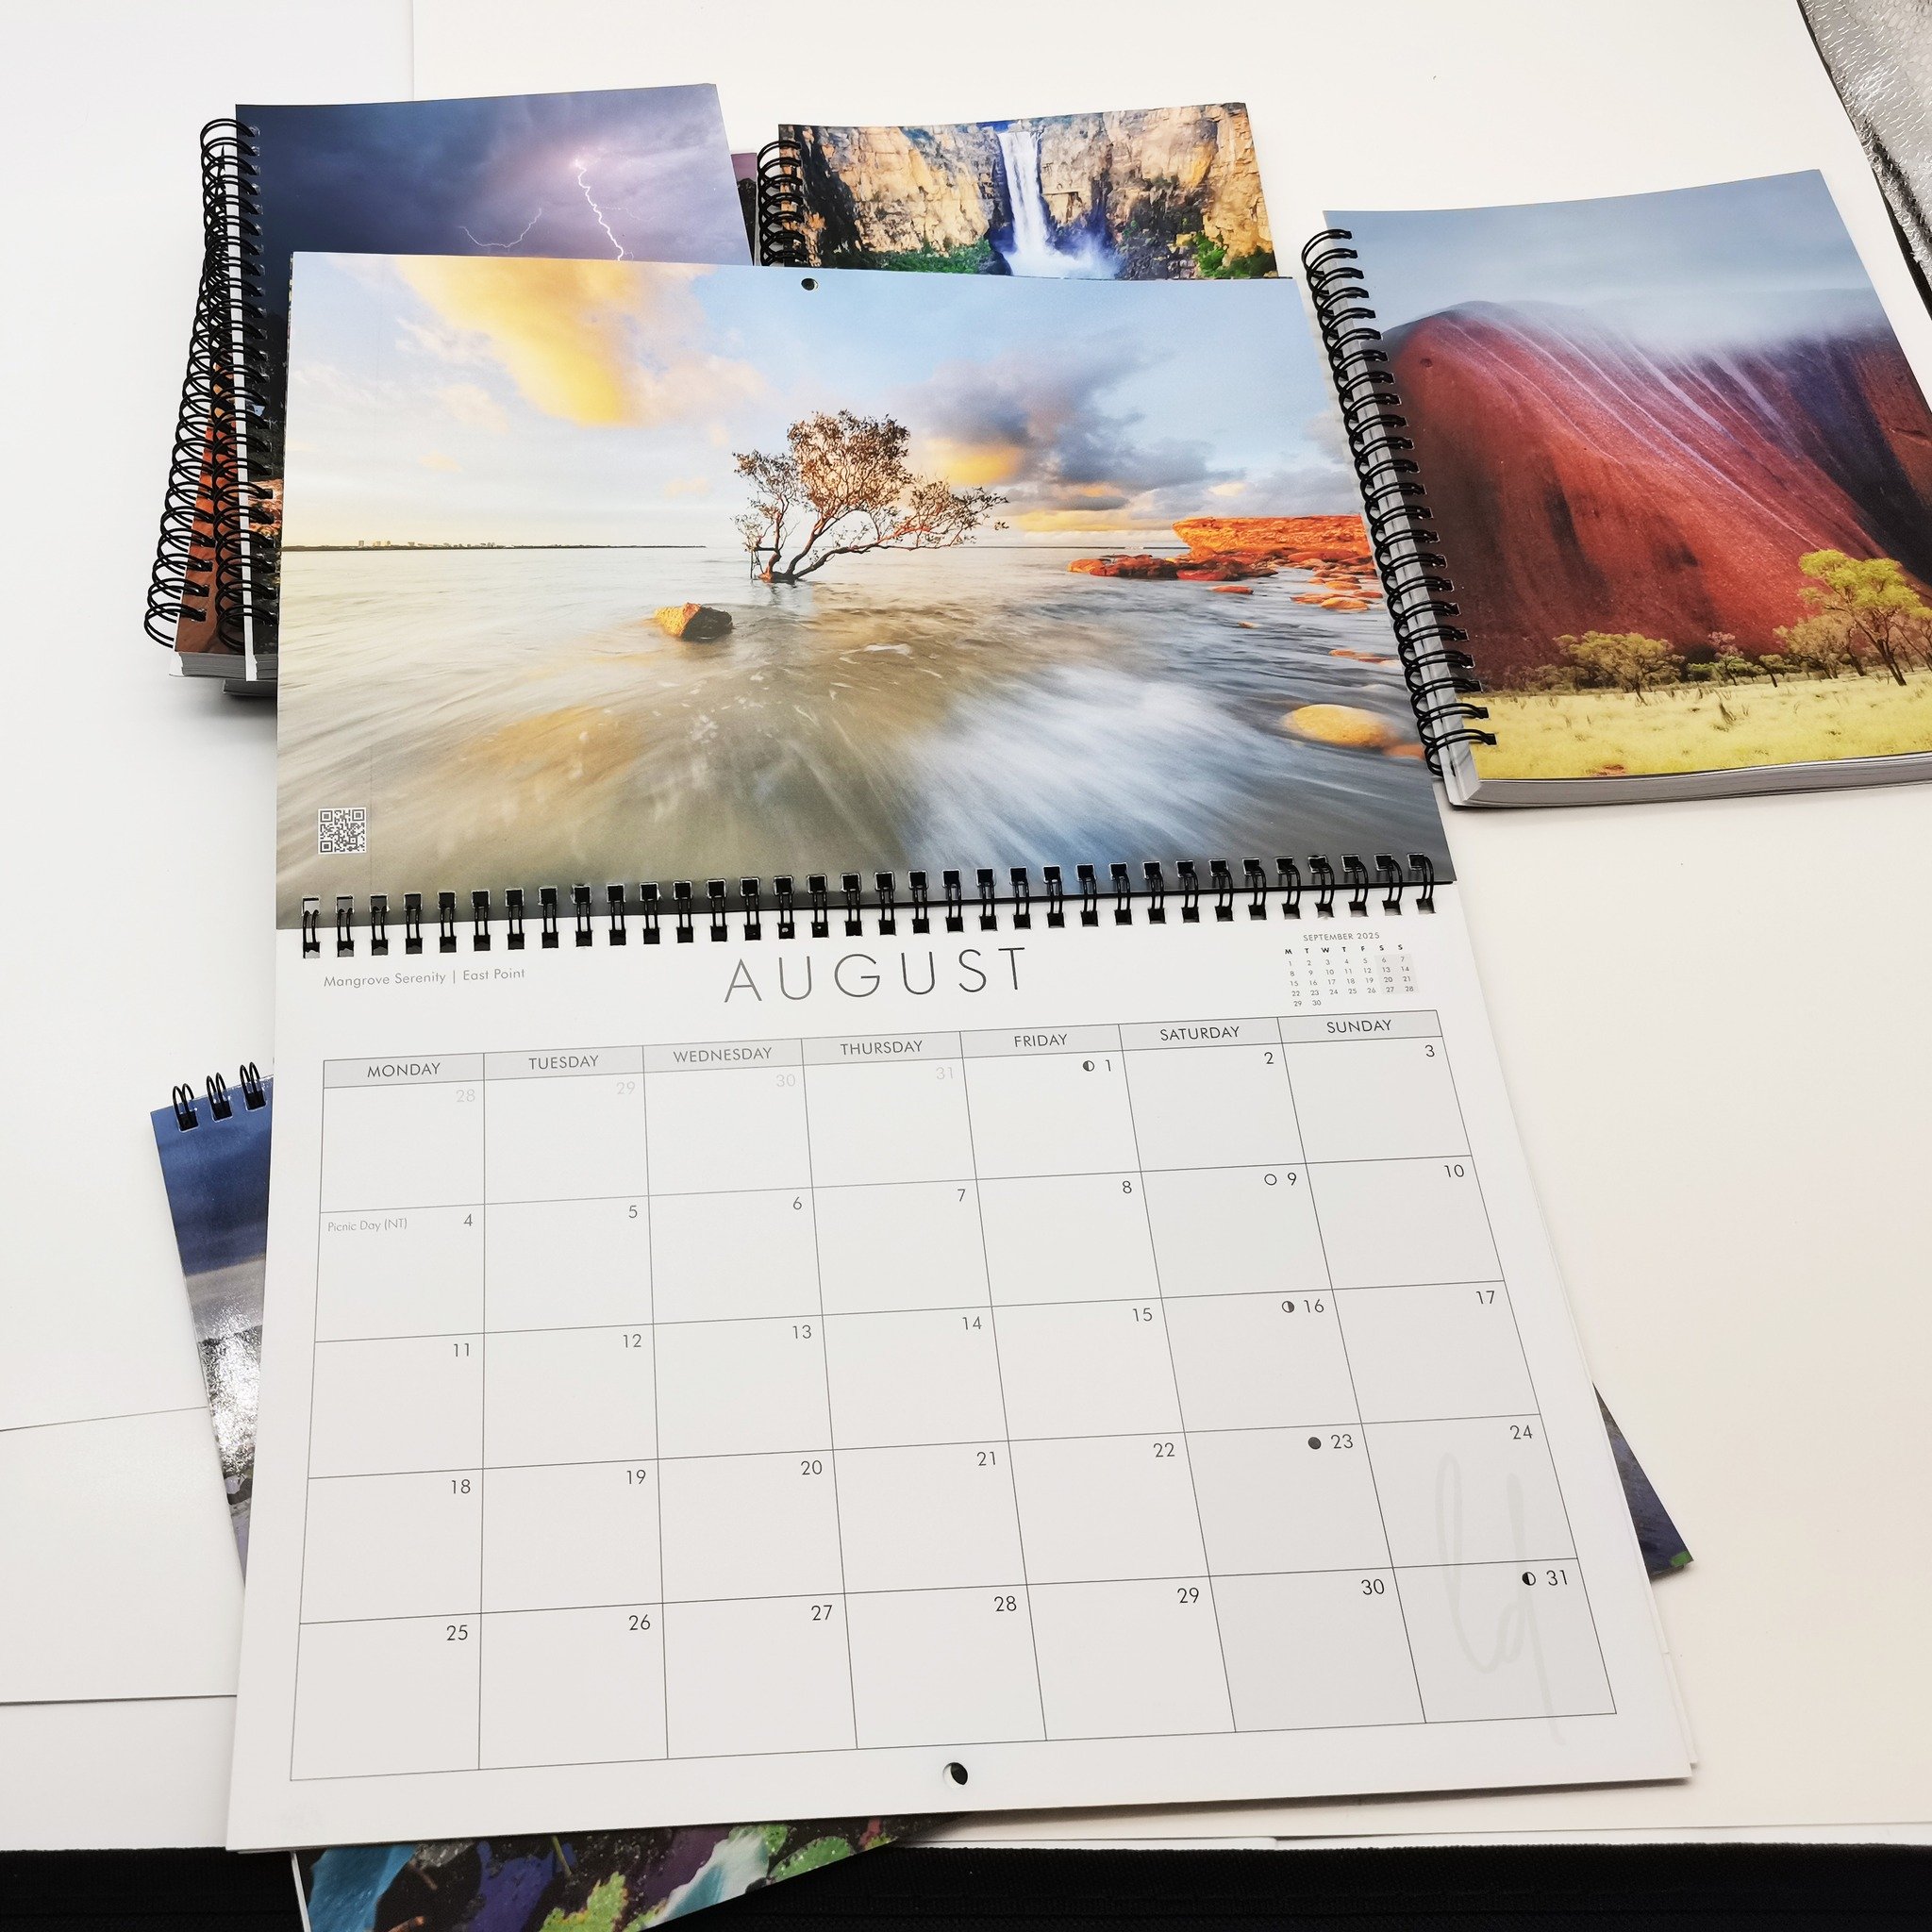 Not long until my 2025 calendars arrive at the Darwin Waterfront gallery! 
And here's a look at the new A5 journals we are launching!

We're offering pre-order and launch specials via my email newsletter - subscribe to get access to the discounts and